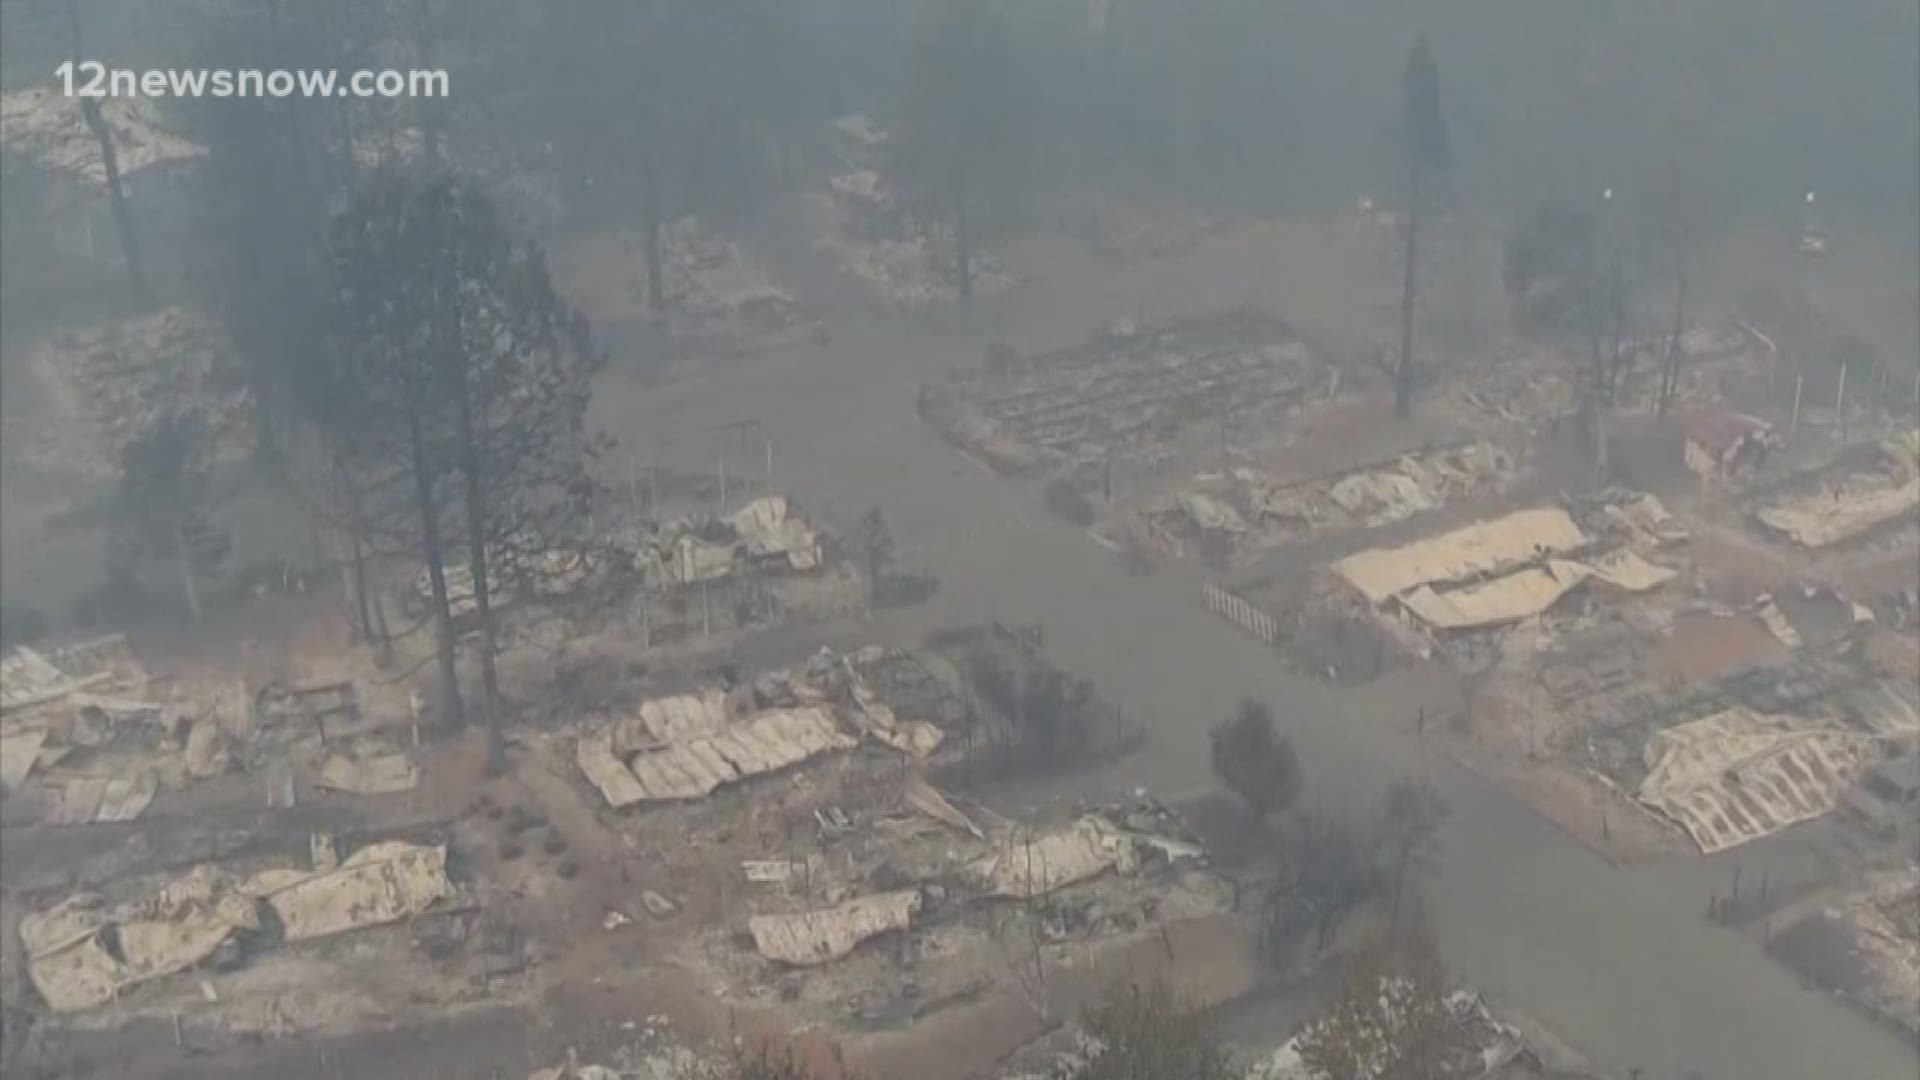 600 people missing after deadly California wildfires